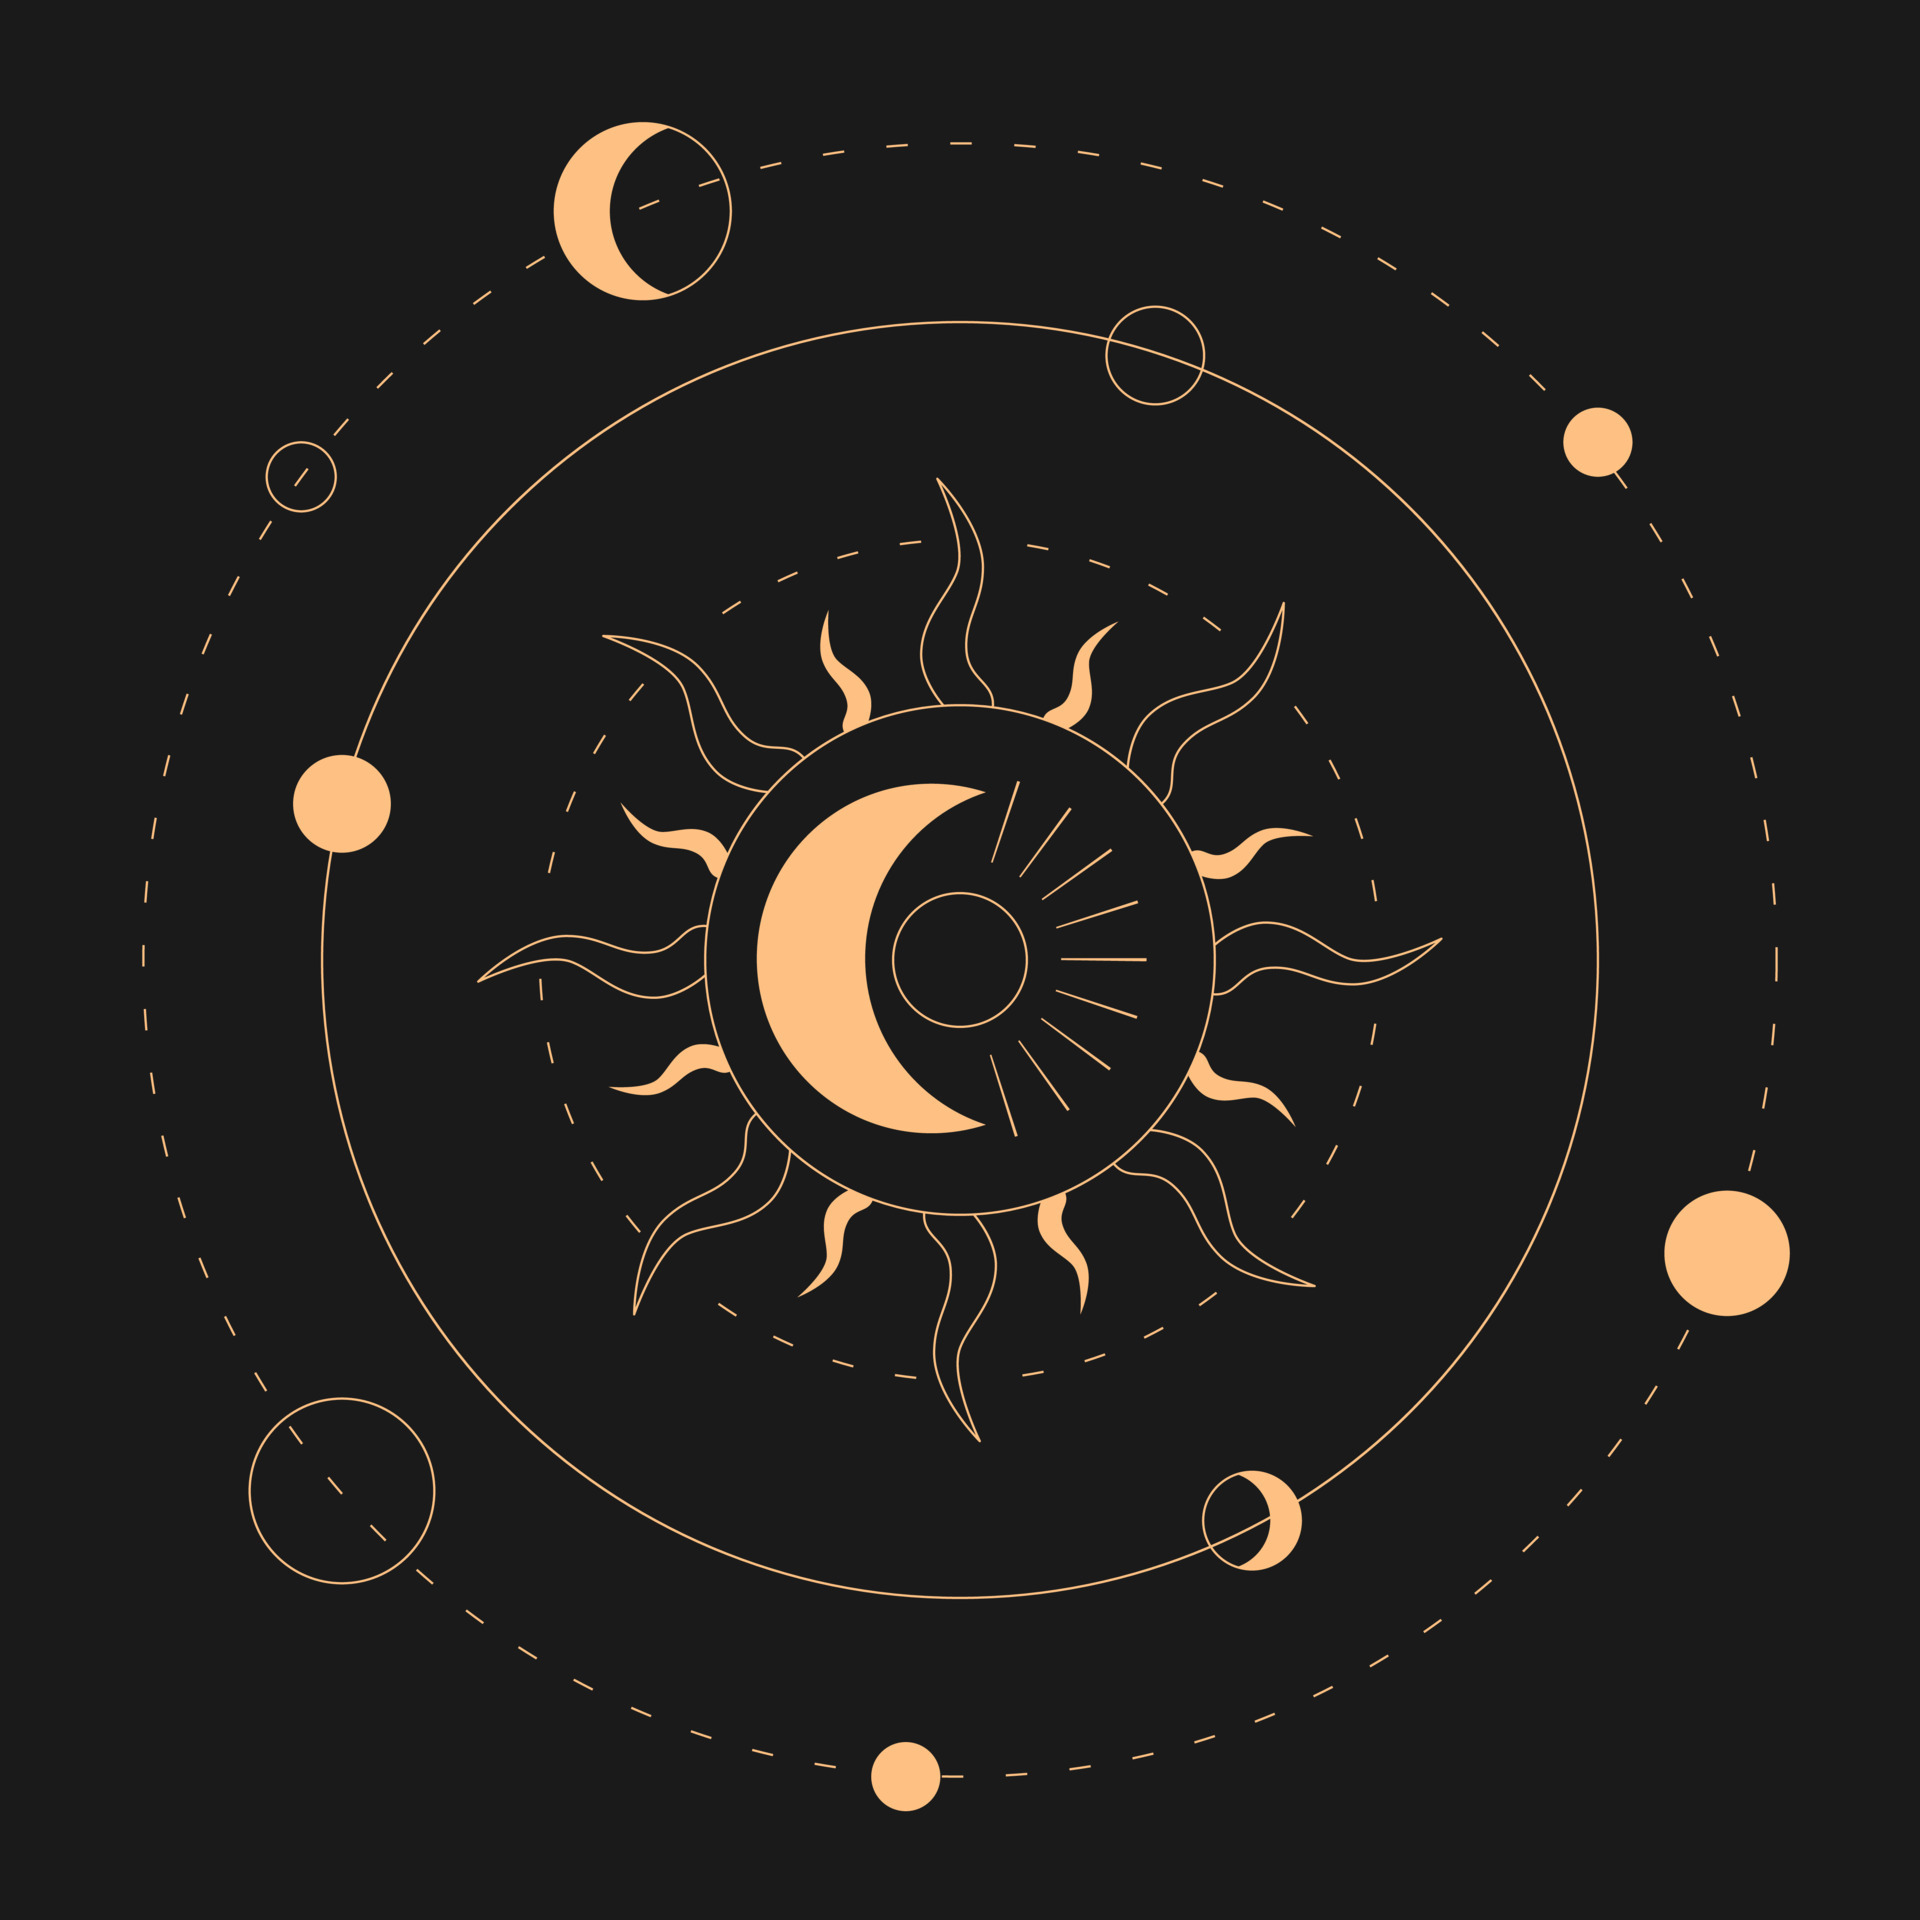 Demande de Multicompte Celestial-sun-and-moon-magical-banner-for-astrology-celestial-alchemy-device-of-the-universe-crescent-sun-with-the-moon-and-planets-on-a-black-background-esoteric-illustration-vector